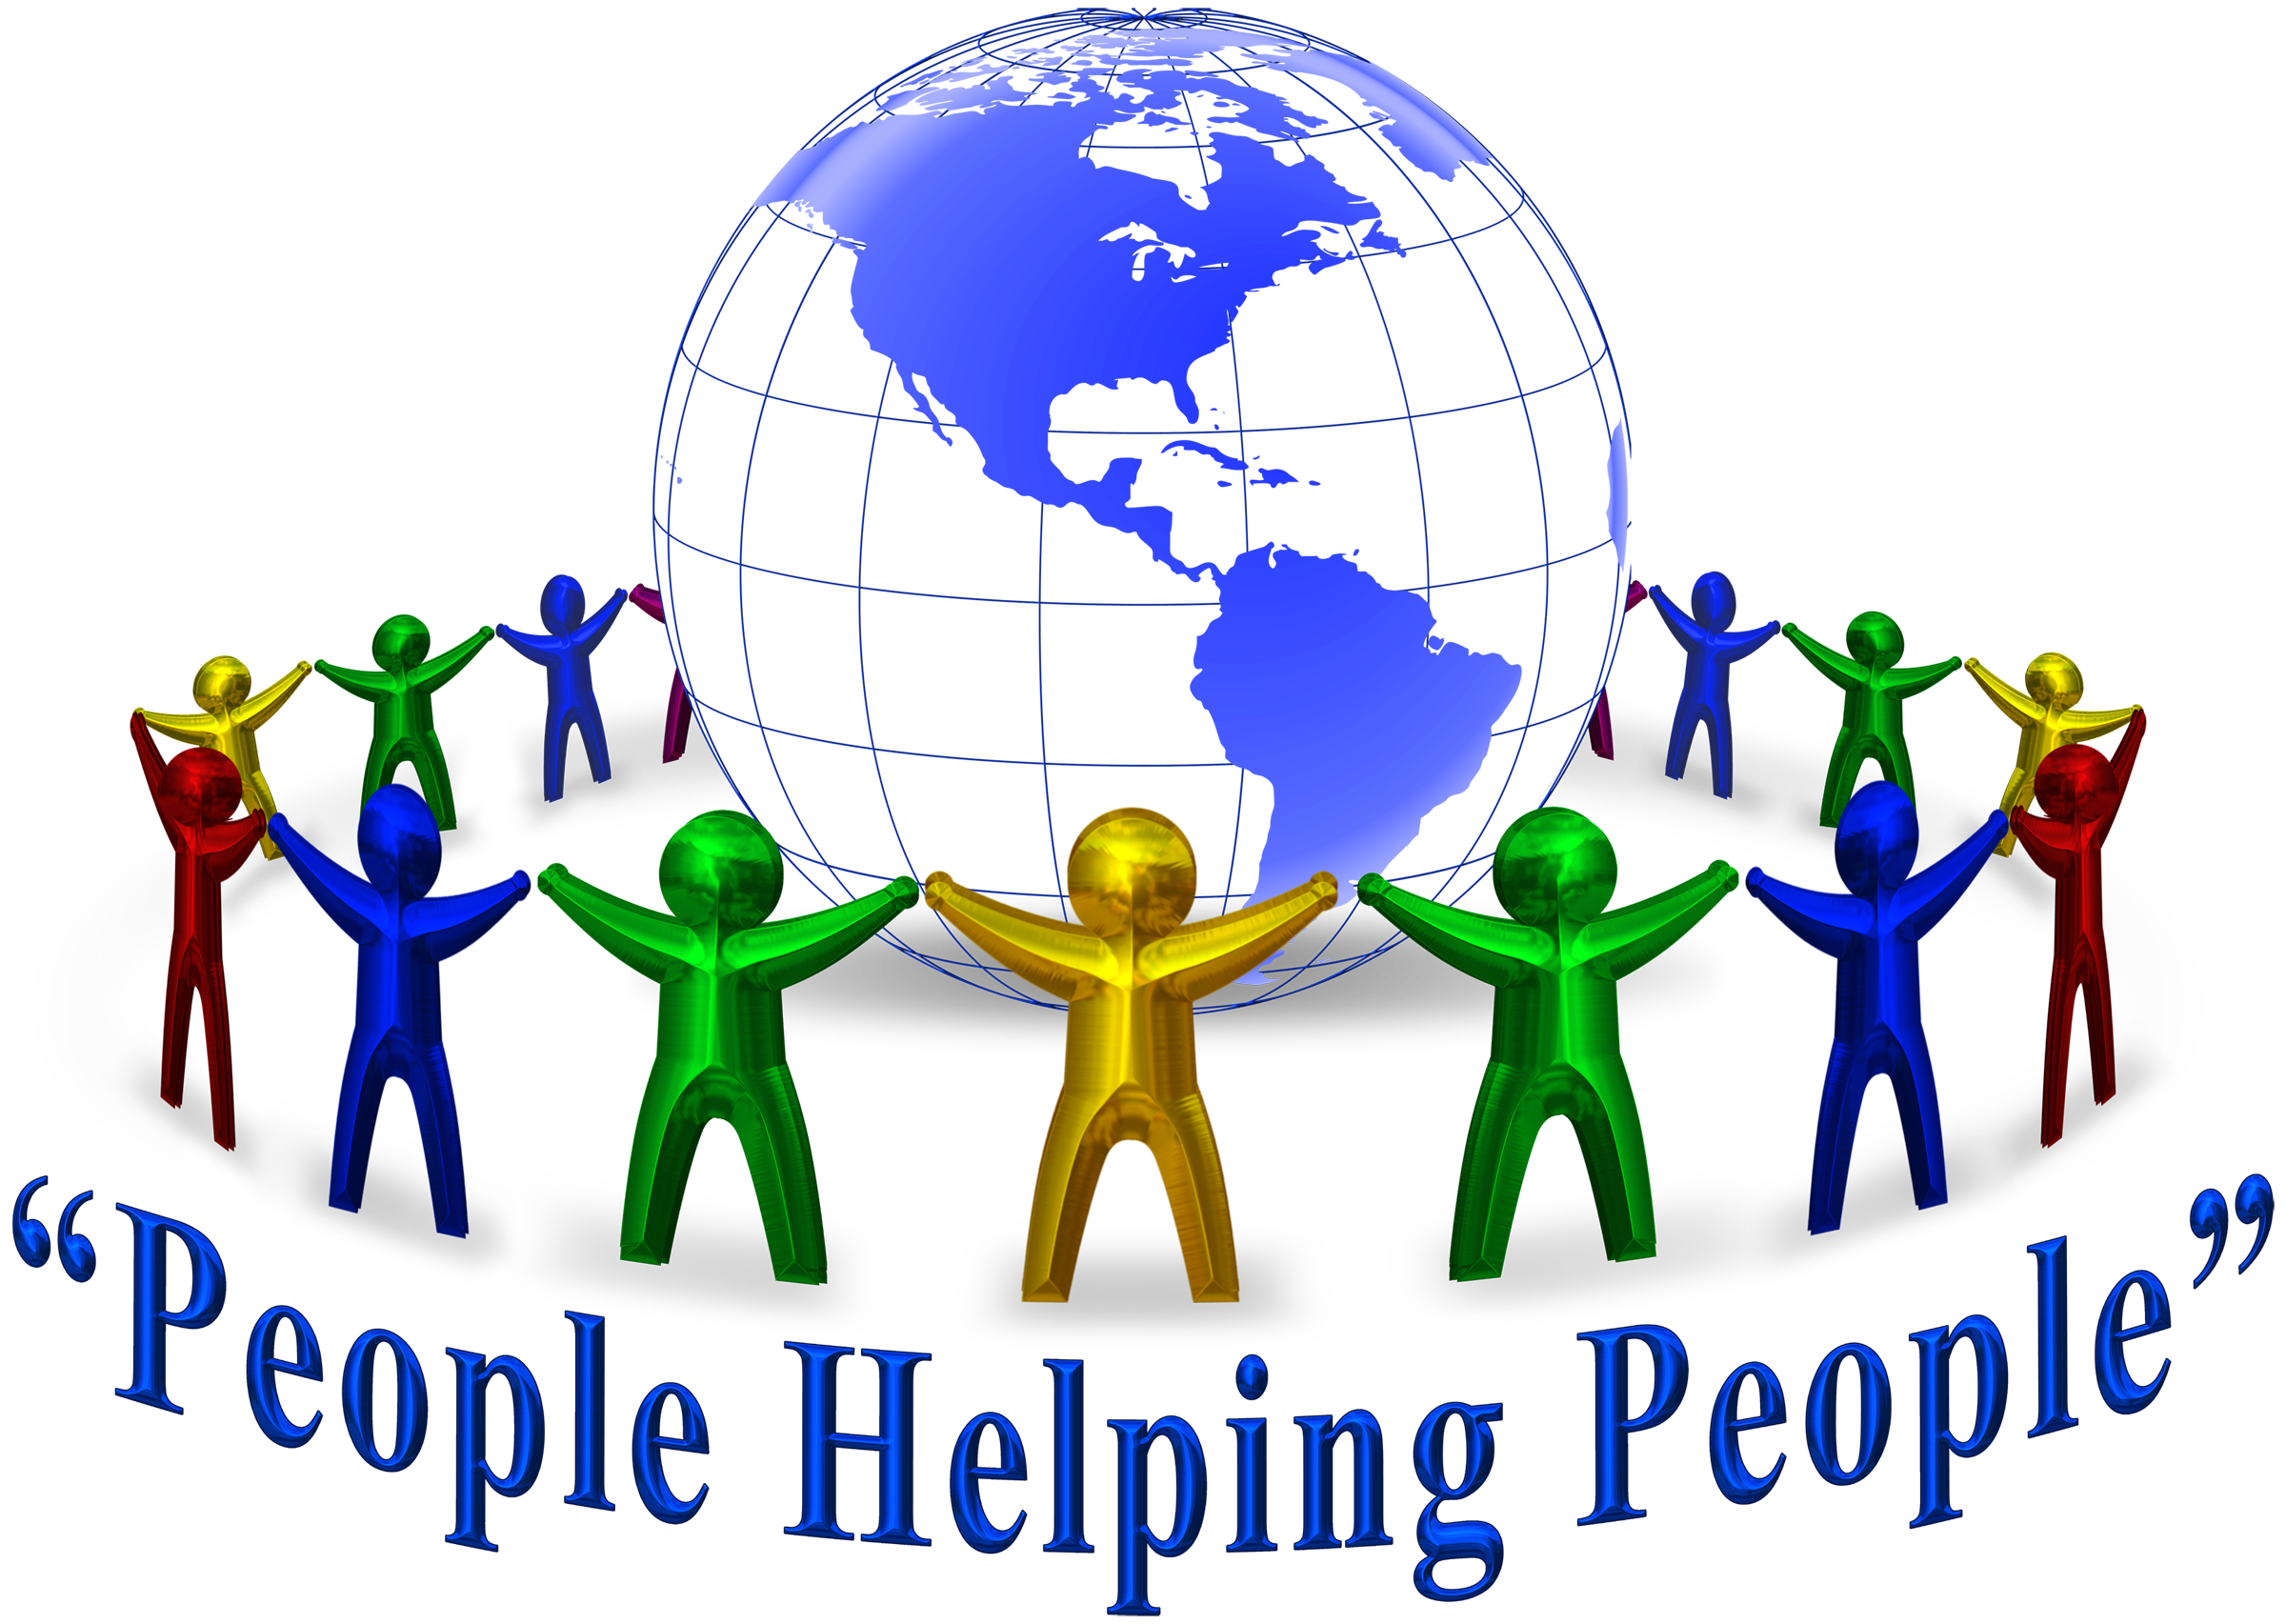 Images for people helping. Humans clipart youth